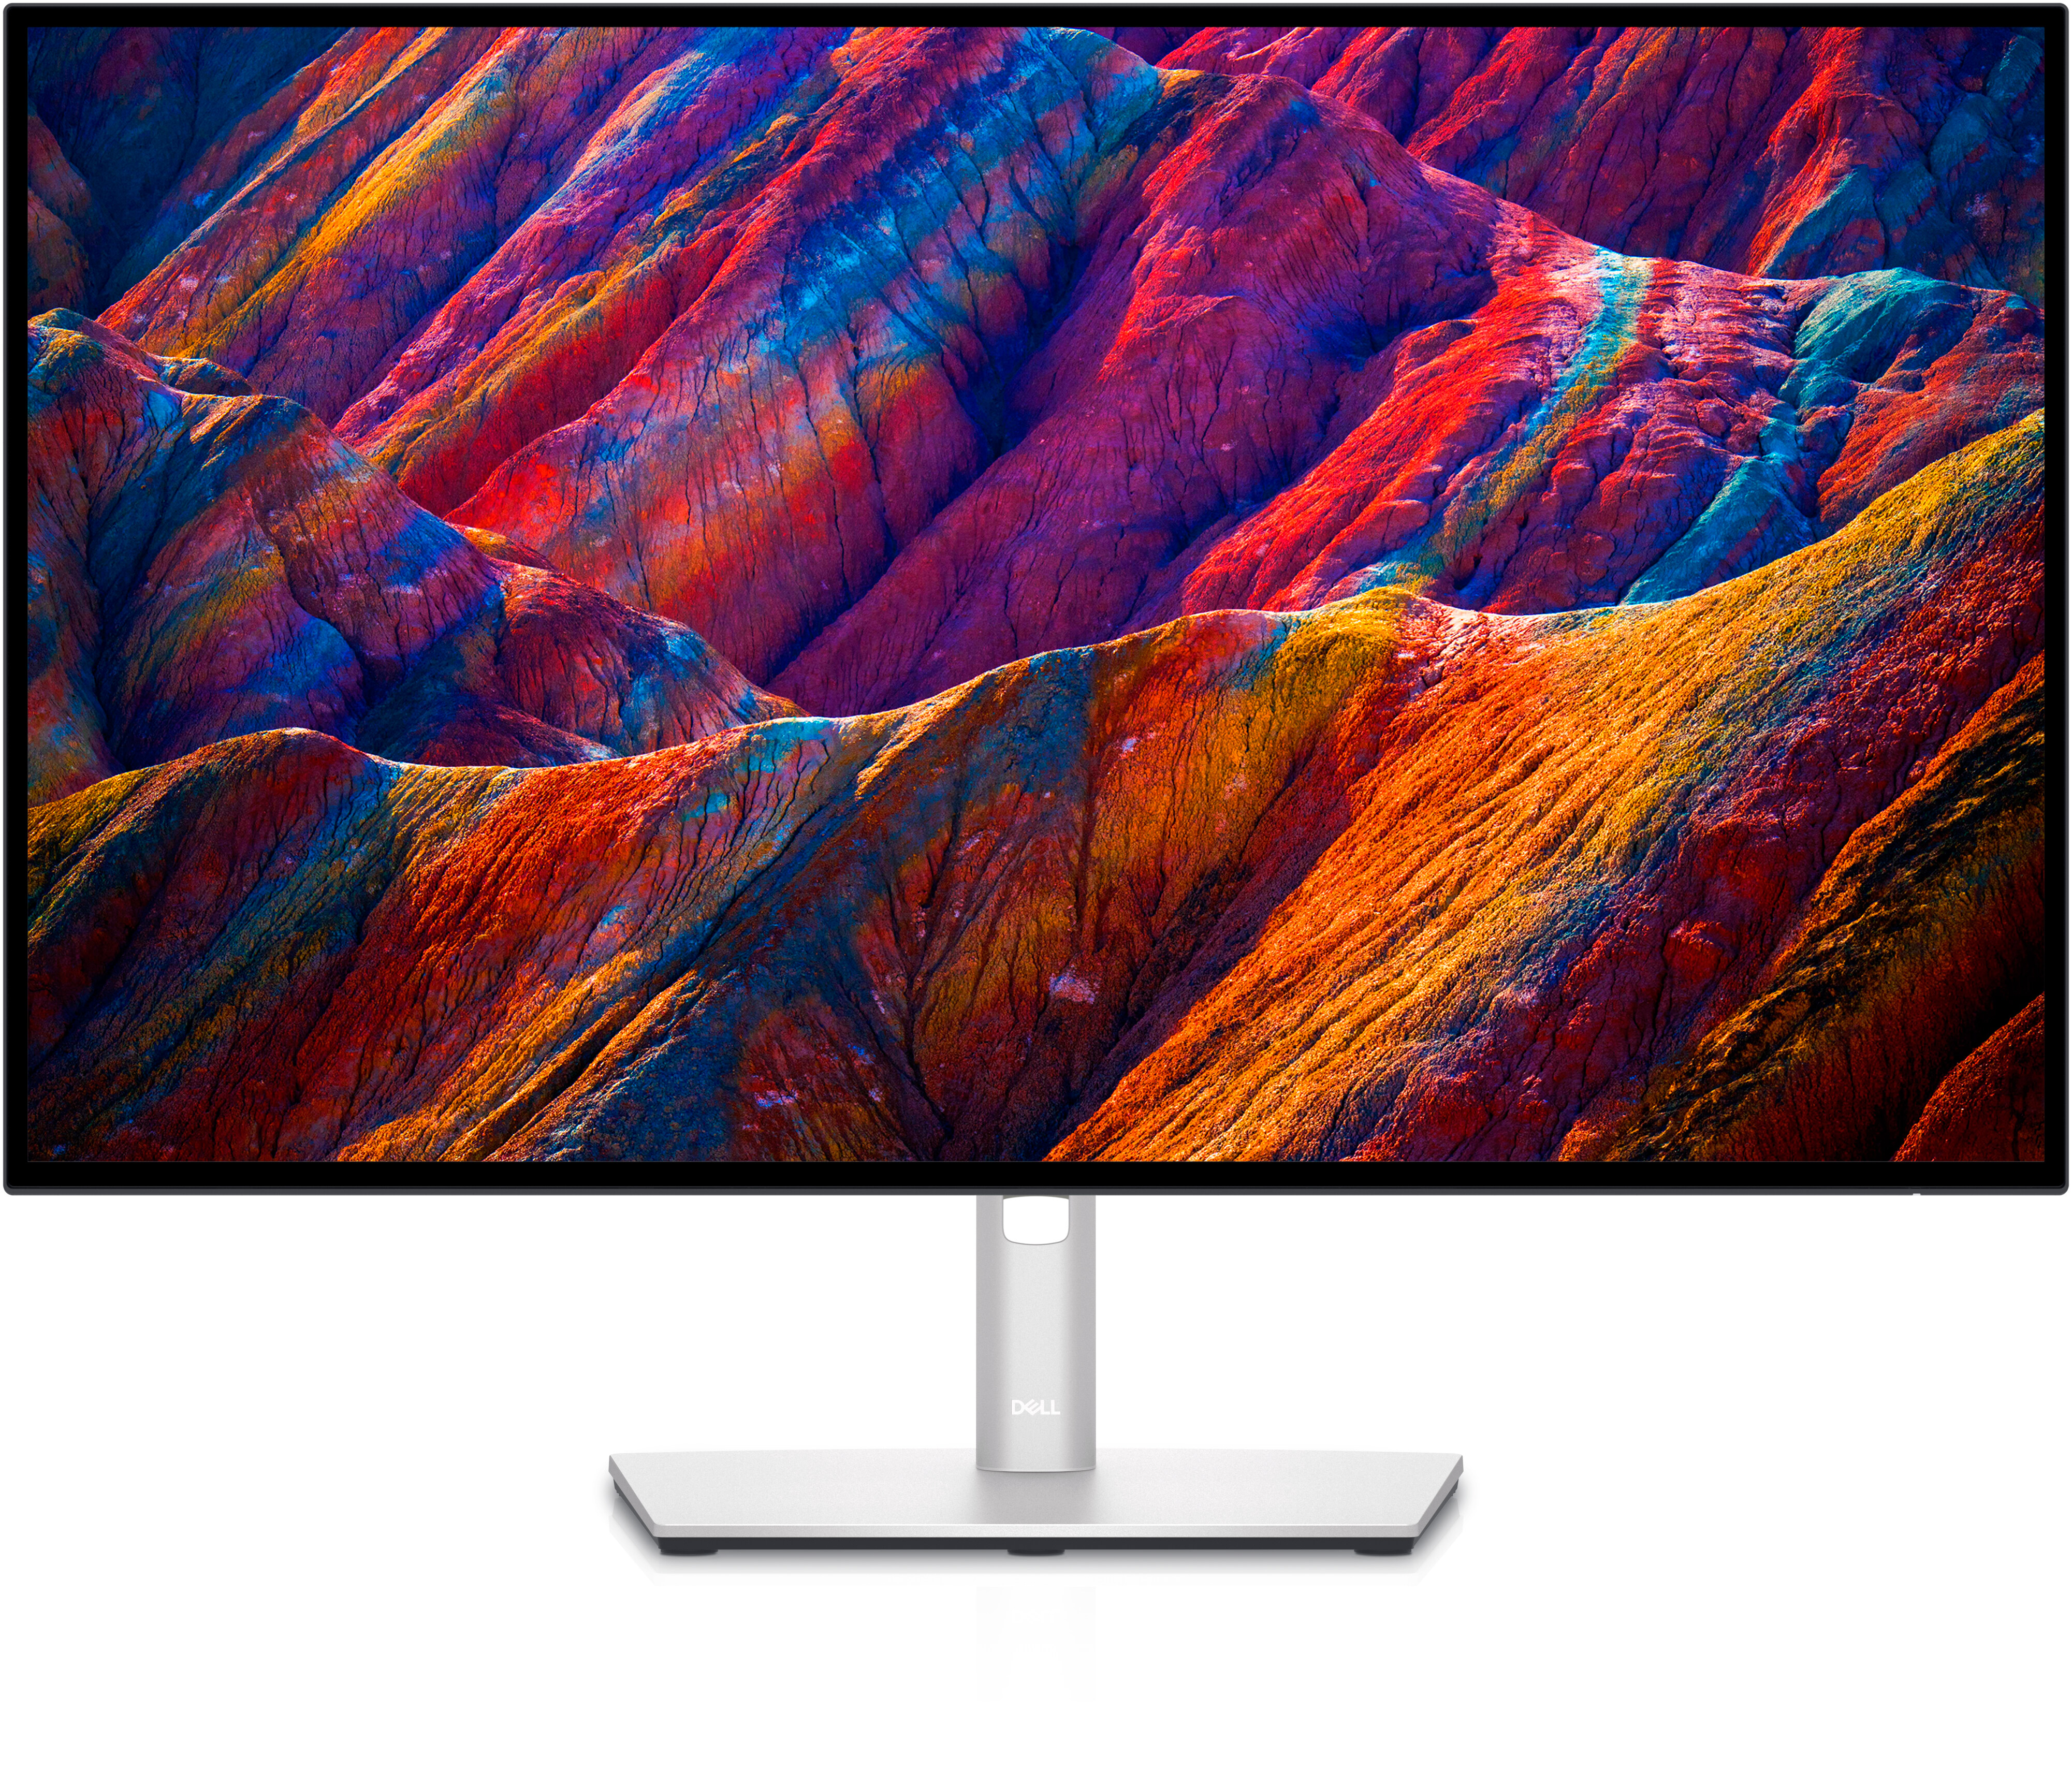 https://i.dell.com/is/image/DellContent/content/dam/ss2/product-images/dell-client-products/peripherals/monitors/u-series/u2723qe/media-gallery/monitor-u2723qe-gallery-2.psd?fmt=pjpg&pscan=auto&scl=1&wid=4002&hei=3419&qlt=100,1&resMode=sharp2&size=4002,3419&chrss=full&imwidth=5000